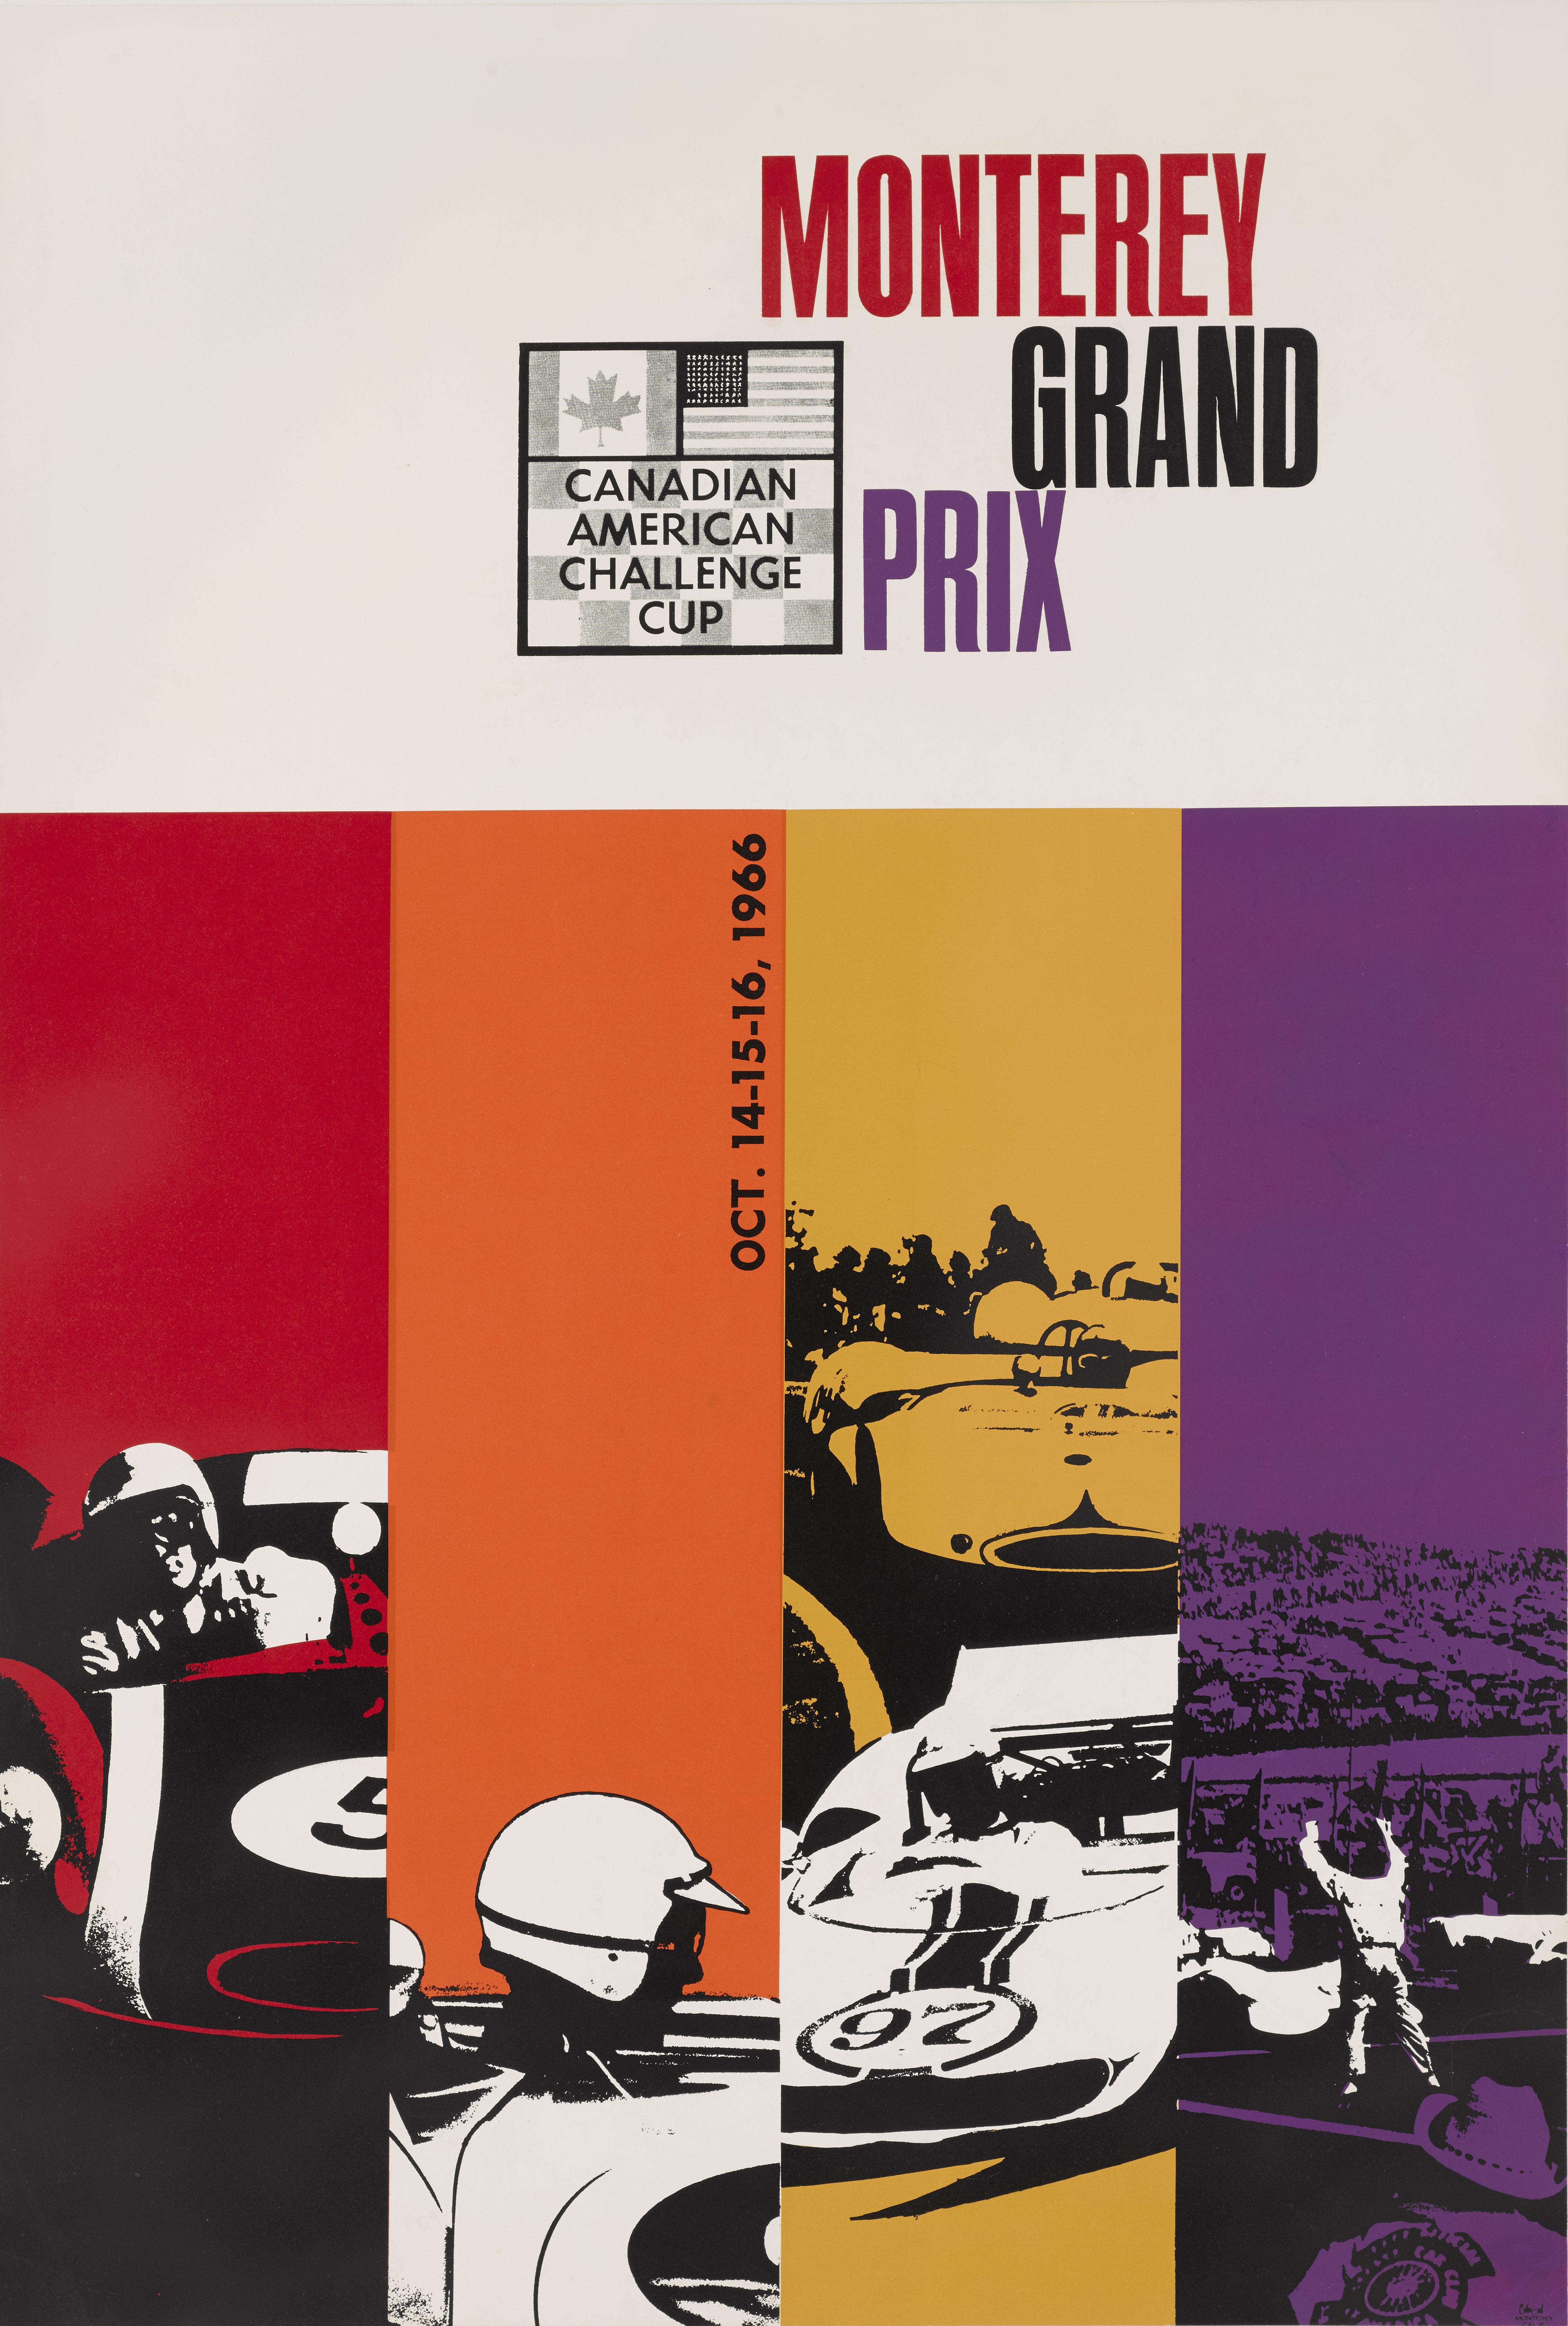 Original US IMSA (silkscreen) poster for the Monterey Grand Prix in 1966.
Held on the shores of California's Laguna Seca Raceway, the IMSA Monterey Grand Prix, 1966
This poster is in excellent condition, with the colors remaining very bright.